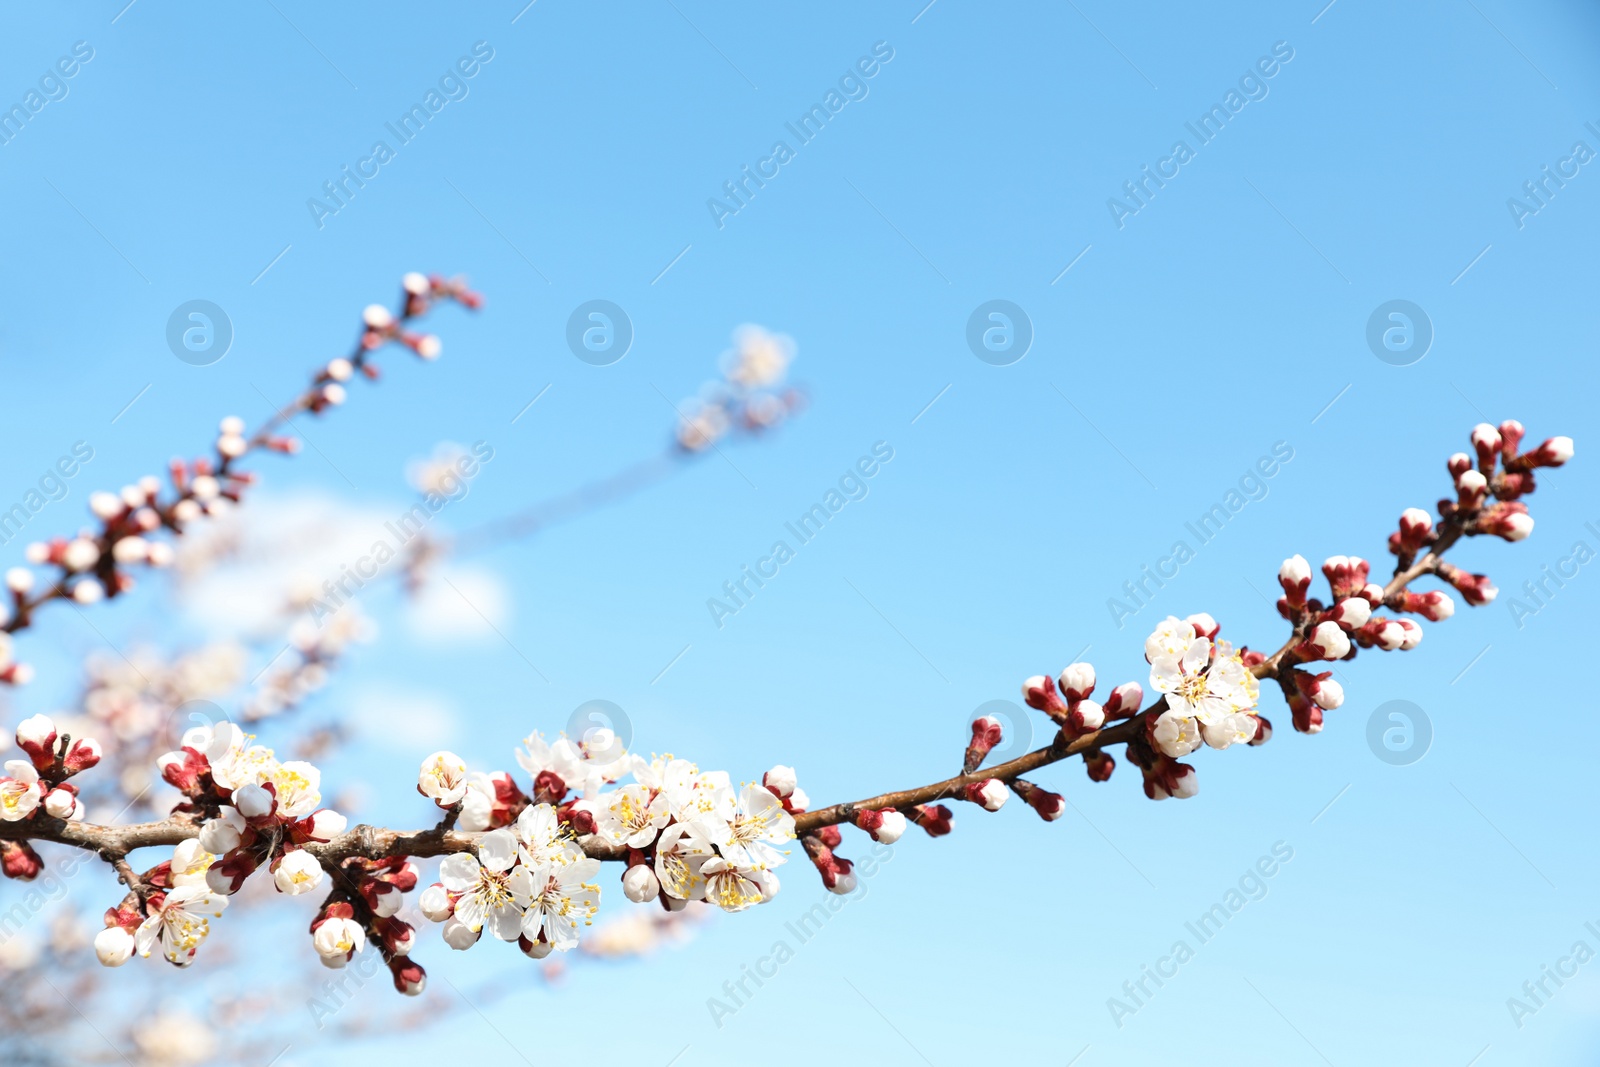 Photo of Beautiful apricot tree branch with tiny tender flowers against blue sky, space for text. Awesome spring blossom